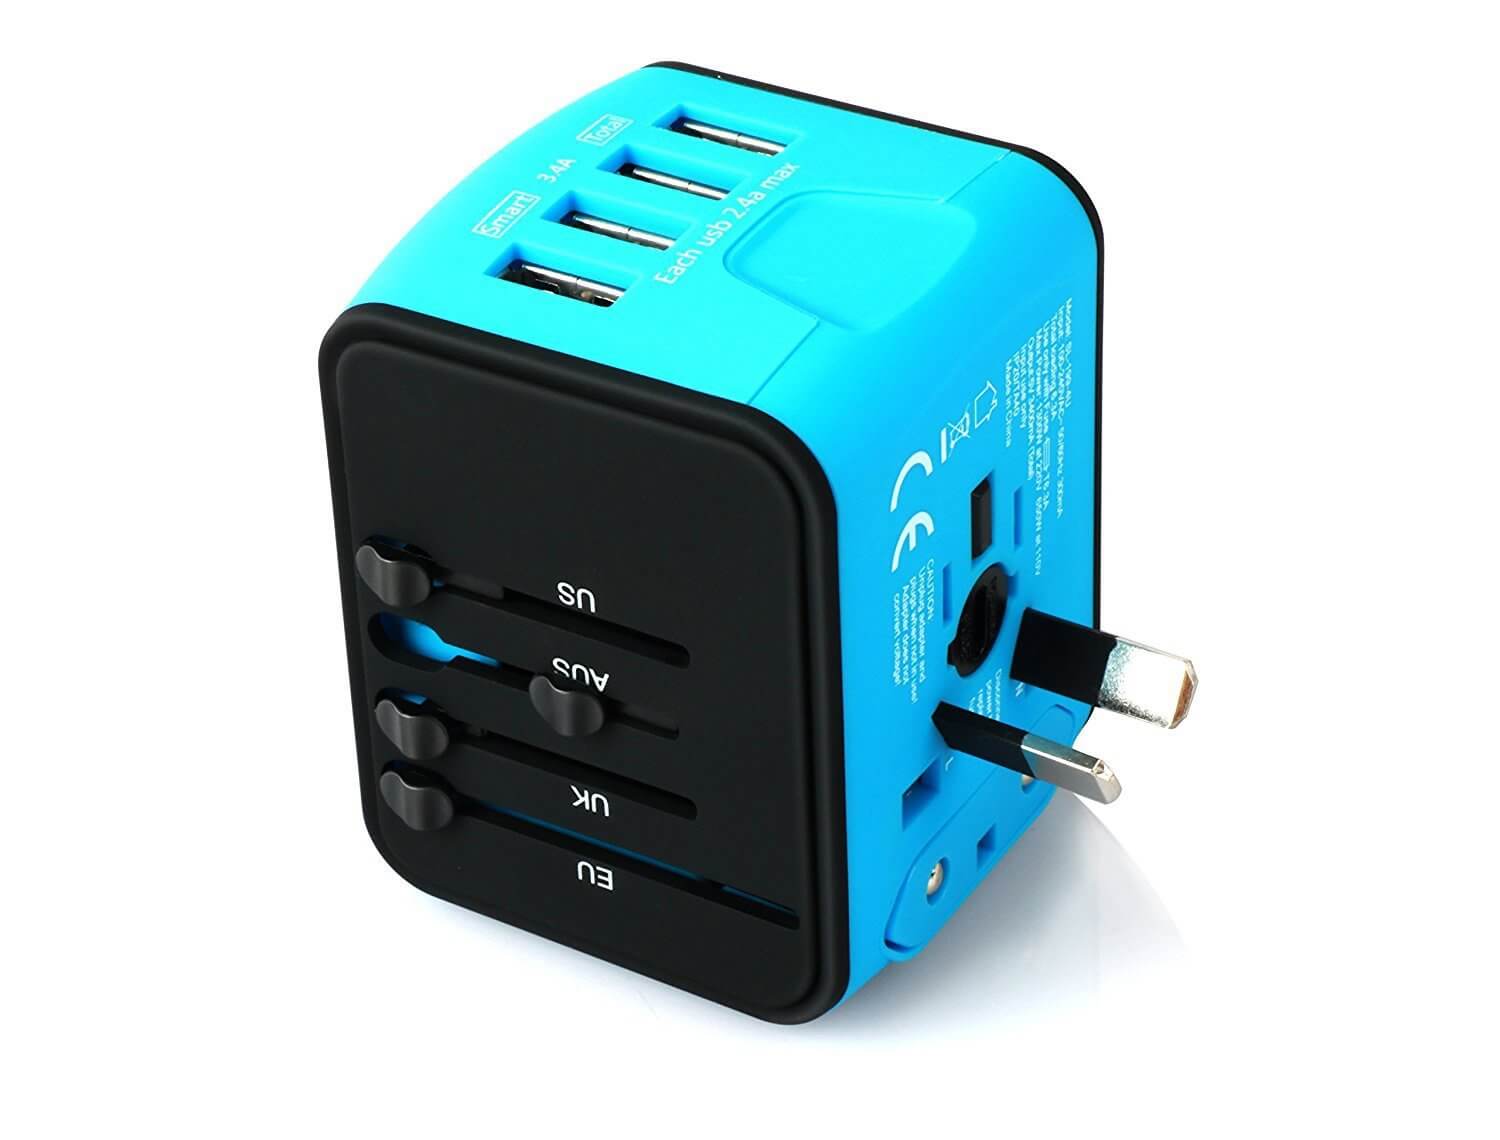 The 4 Port All In One Adapter You Need Go To 170 Countries With Only One Adapter